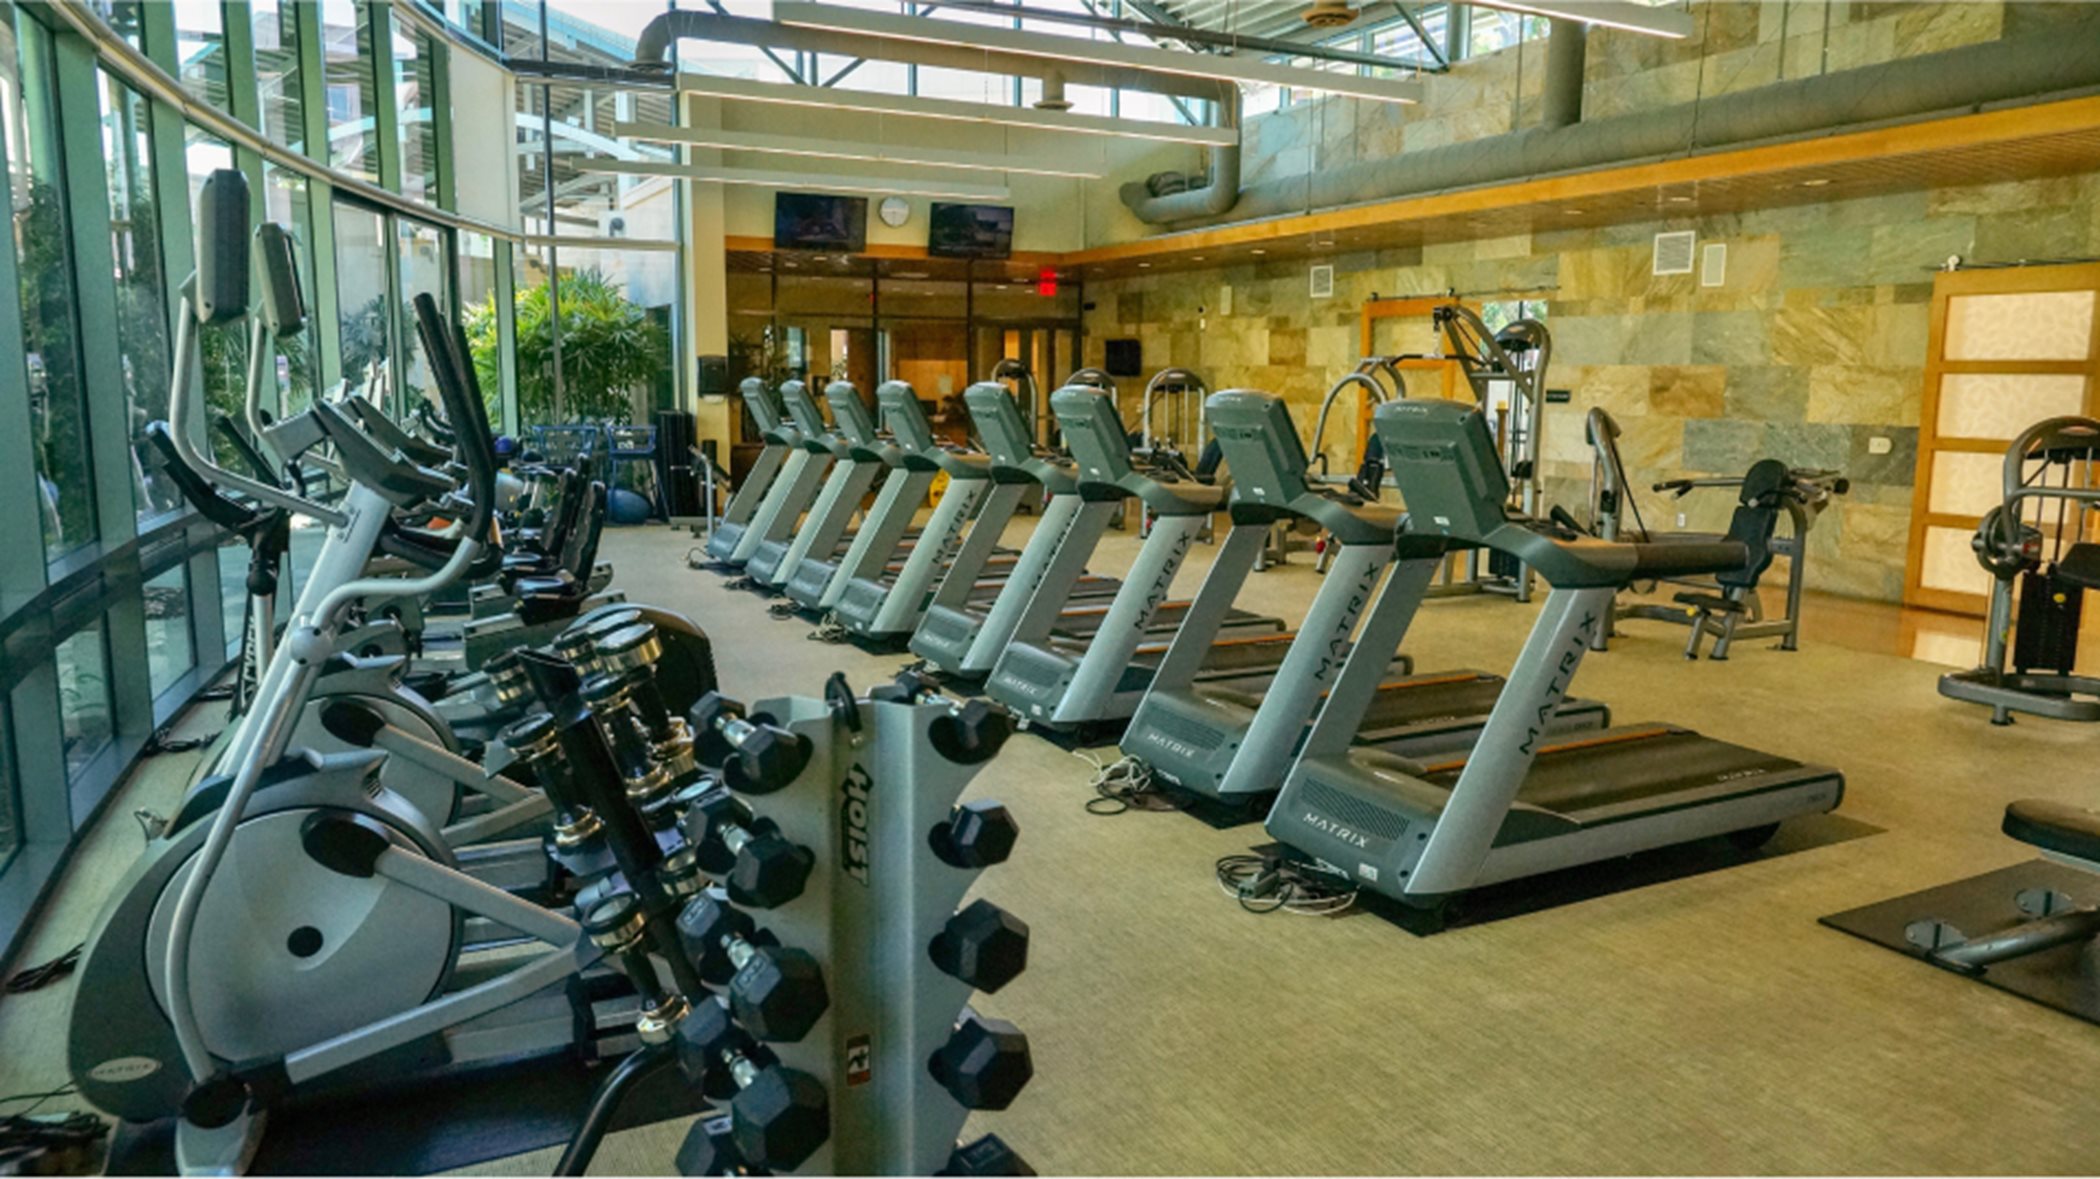 Fitness center interior with rows of treadmills